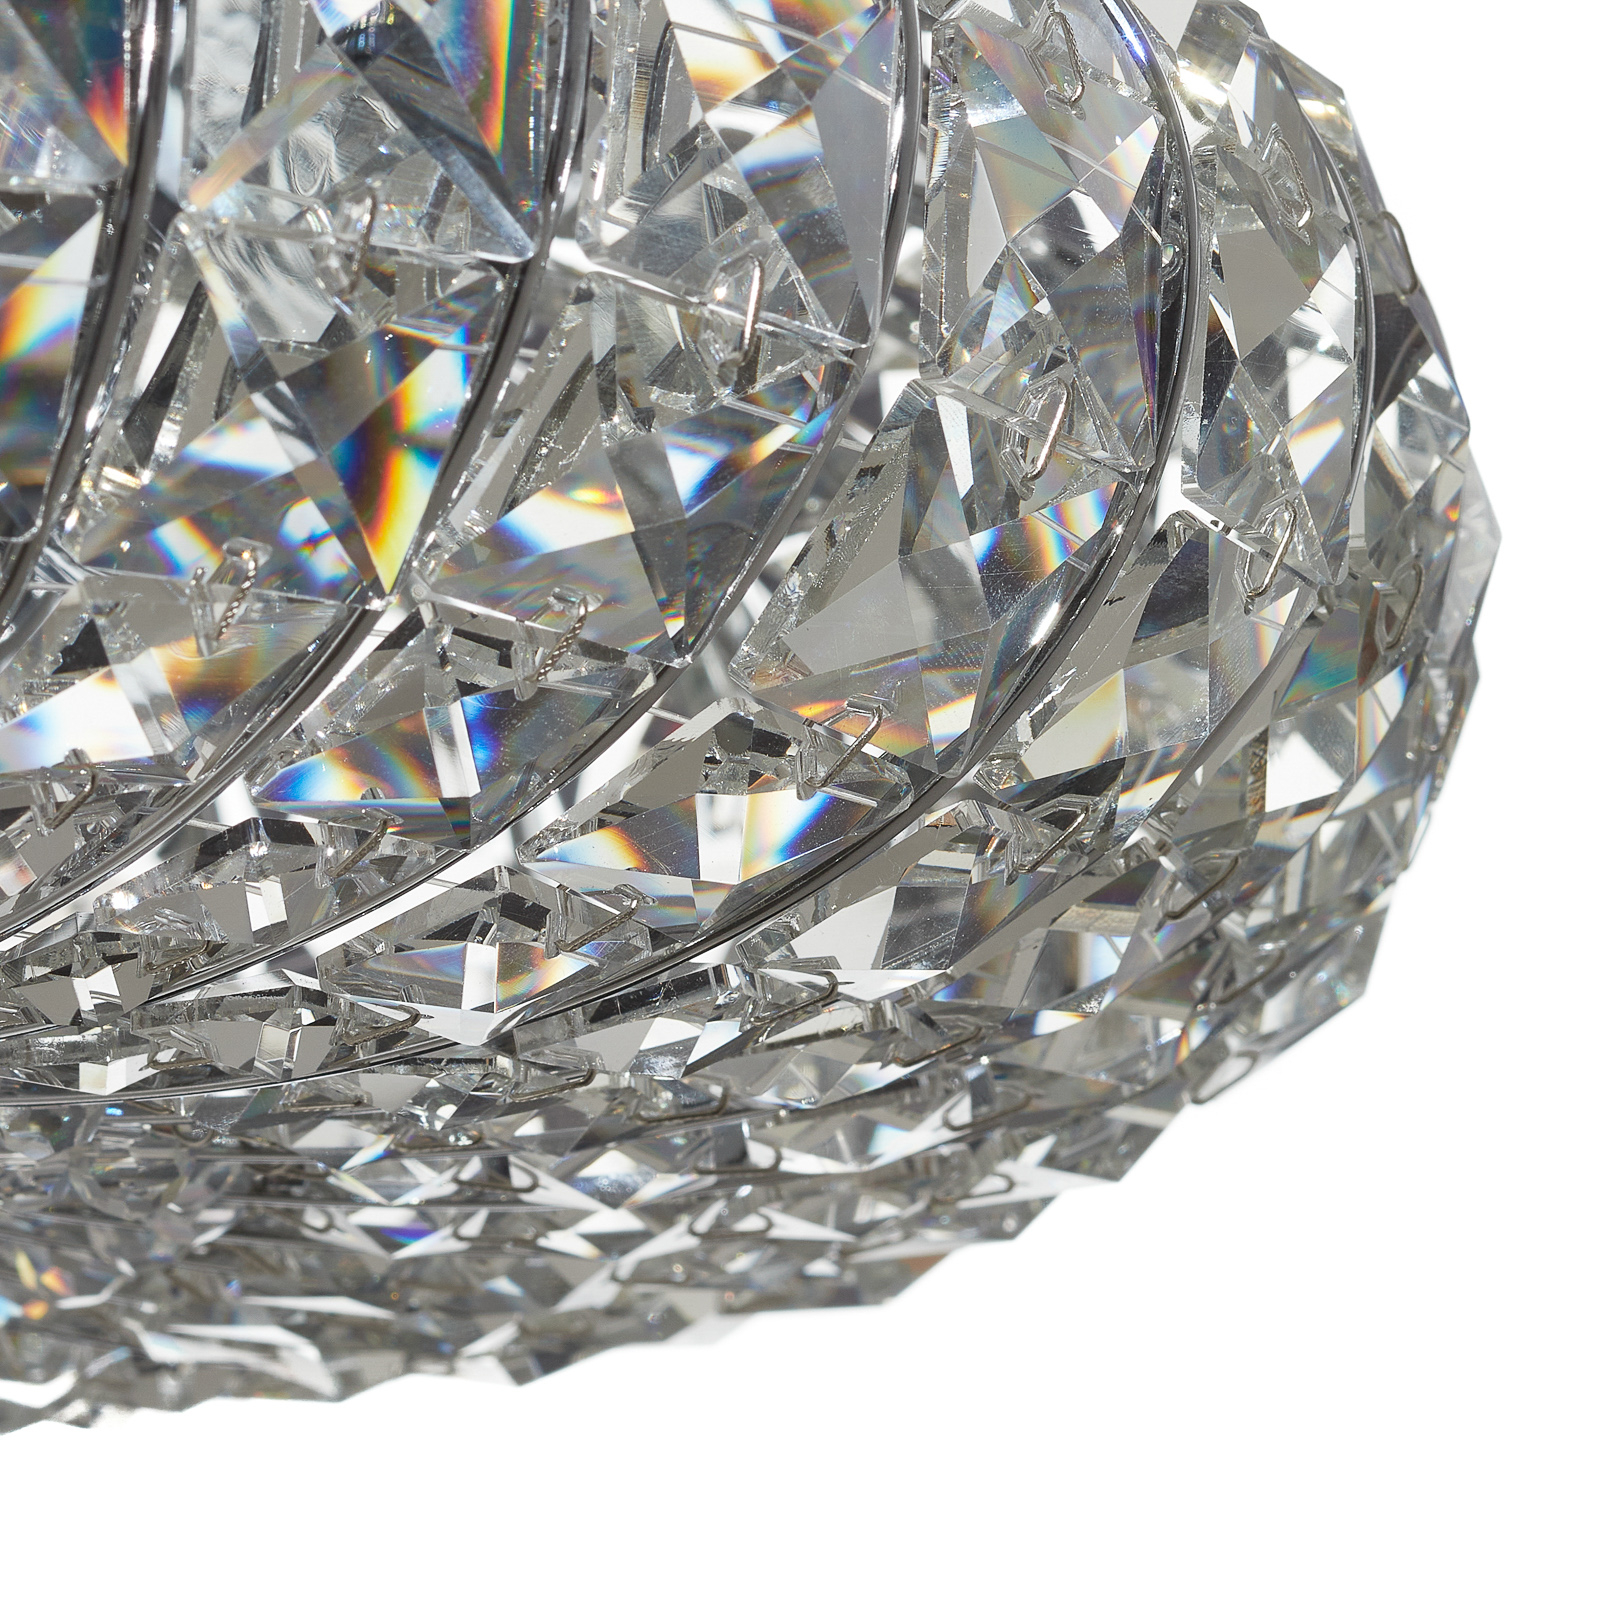 Broche ceiling light with crystals, Ø 49 cm